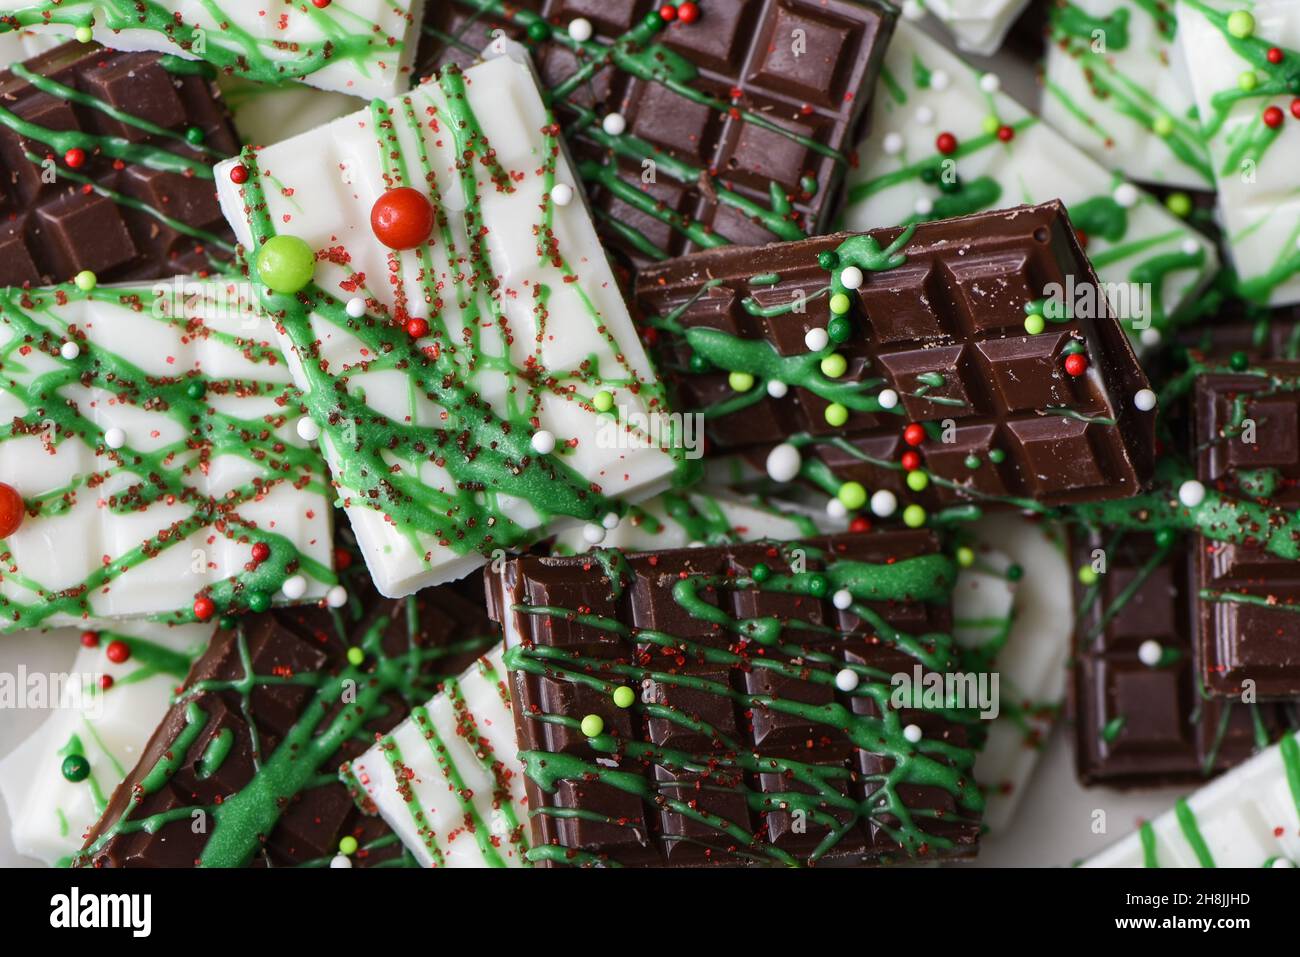 Decorated Christmas chocolate candy bars Stock Photo